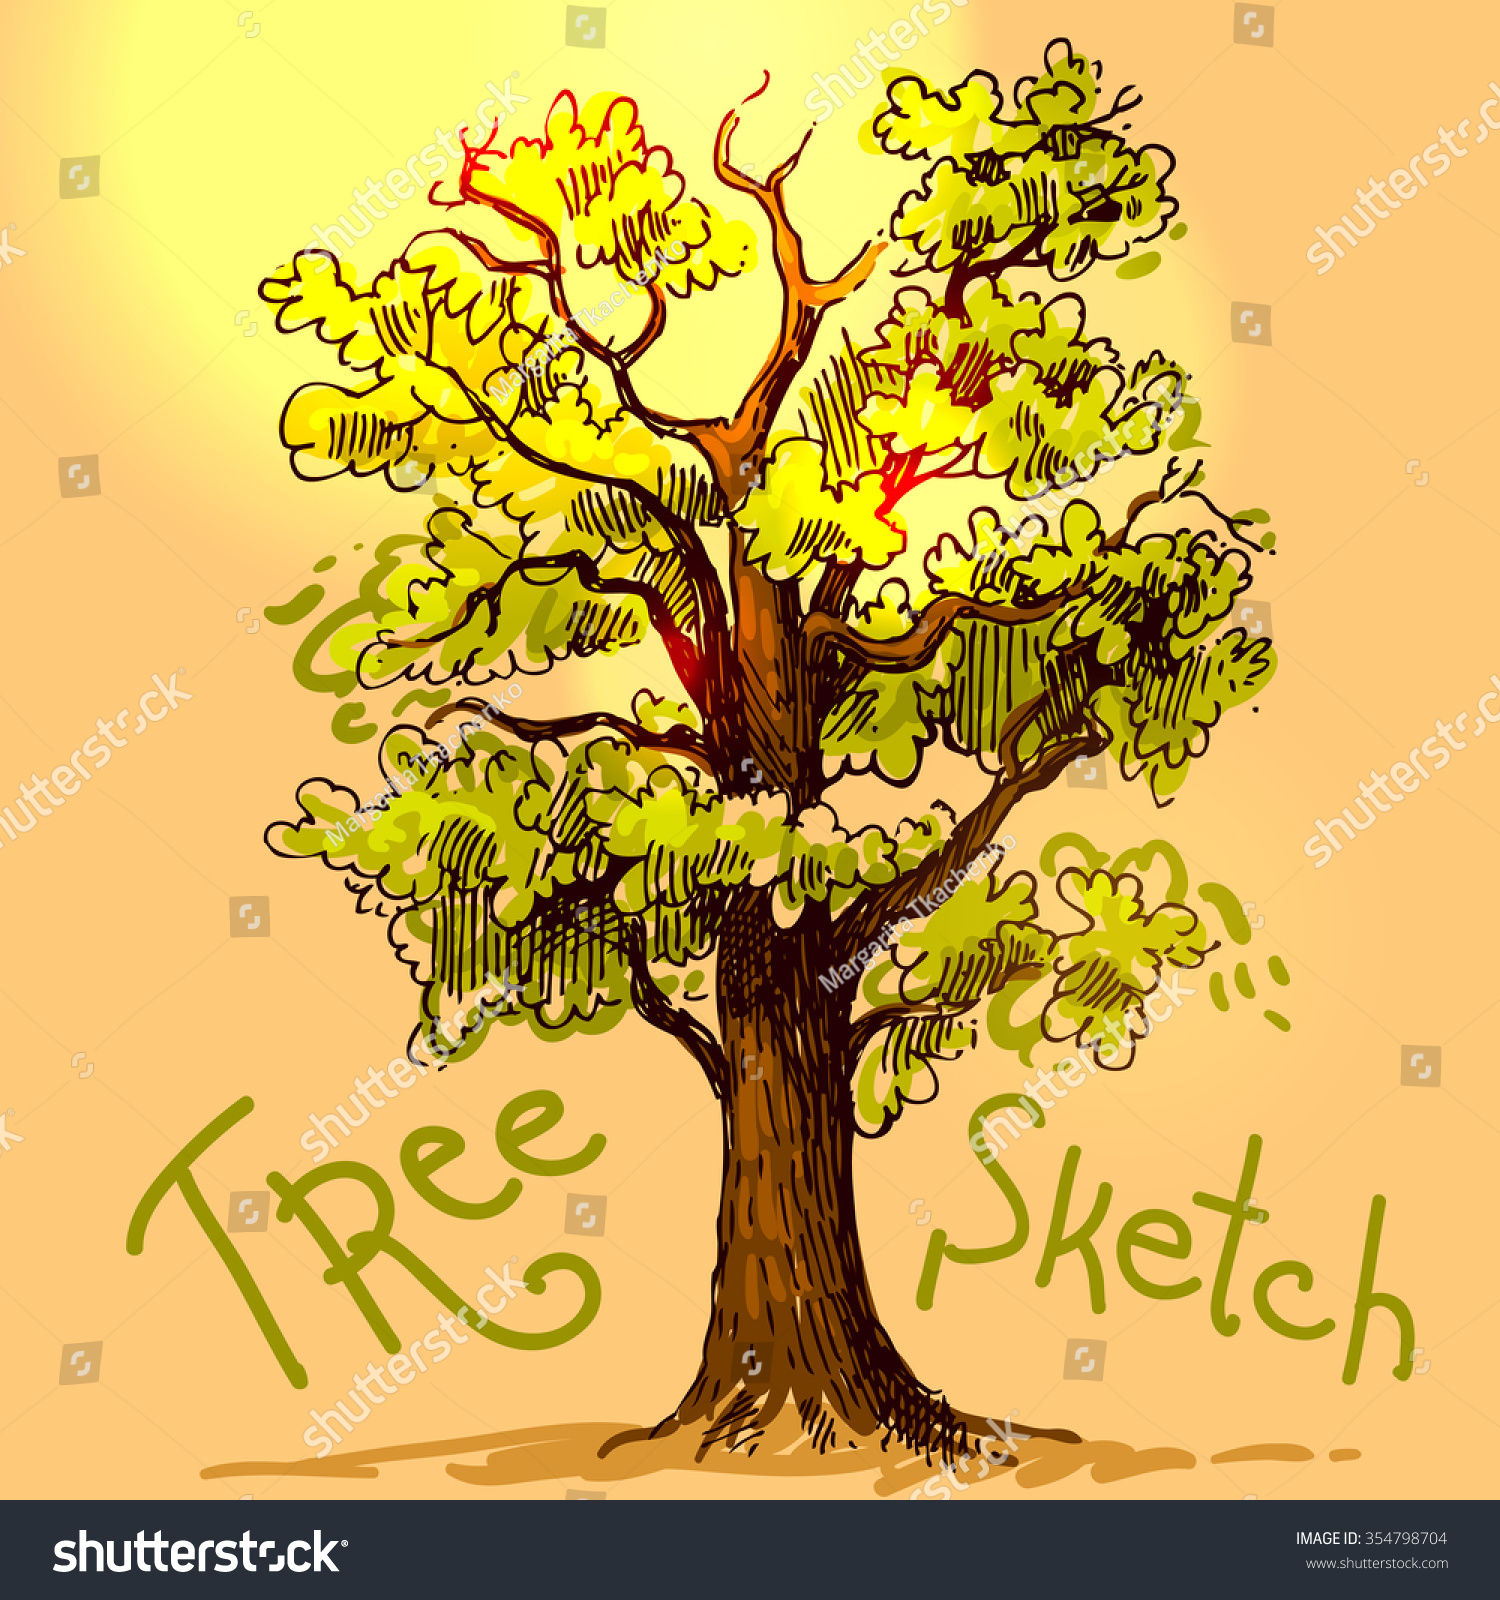 Beautiful Hand Drawn Sketch Tree Your Stock Vector 354798704 - Shutterstock